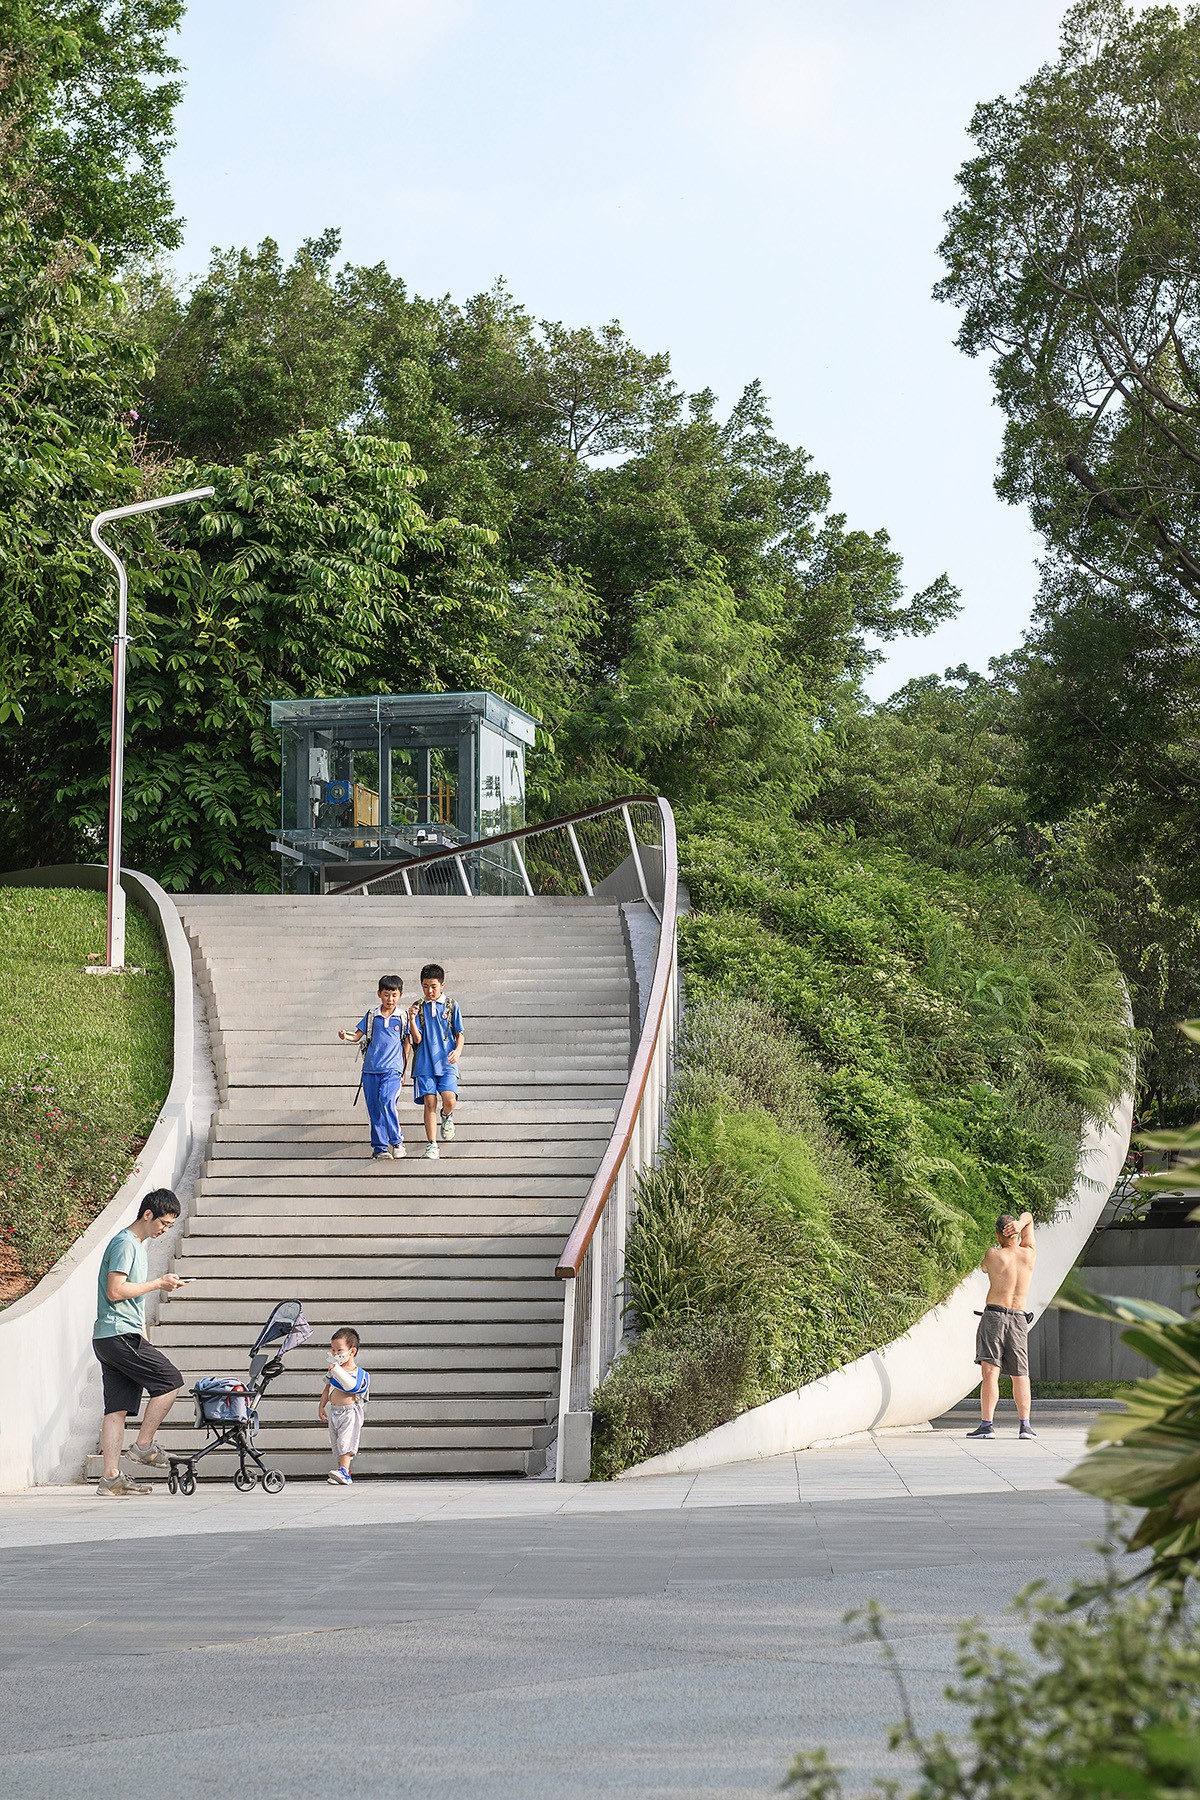 The Opened Land – Redevelopment Design of the Eastern Entrance of Shenzhen People’s Park. © REFORM. Photography: Pei Yu, Sai Shu